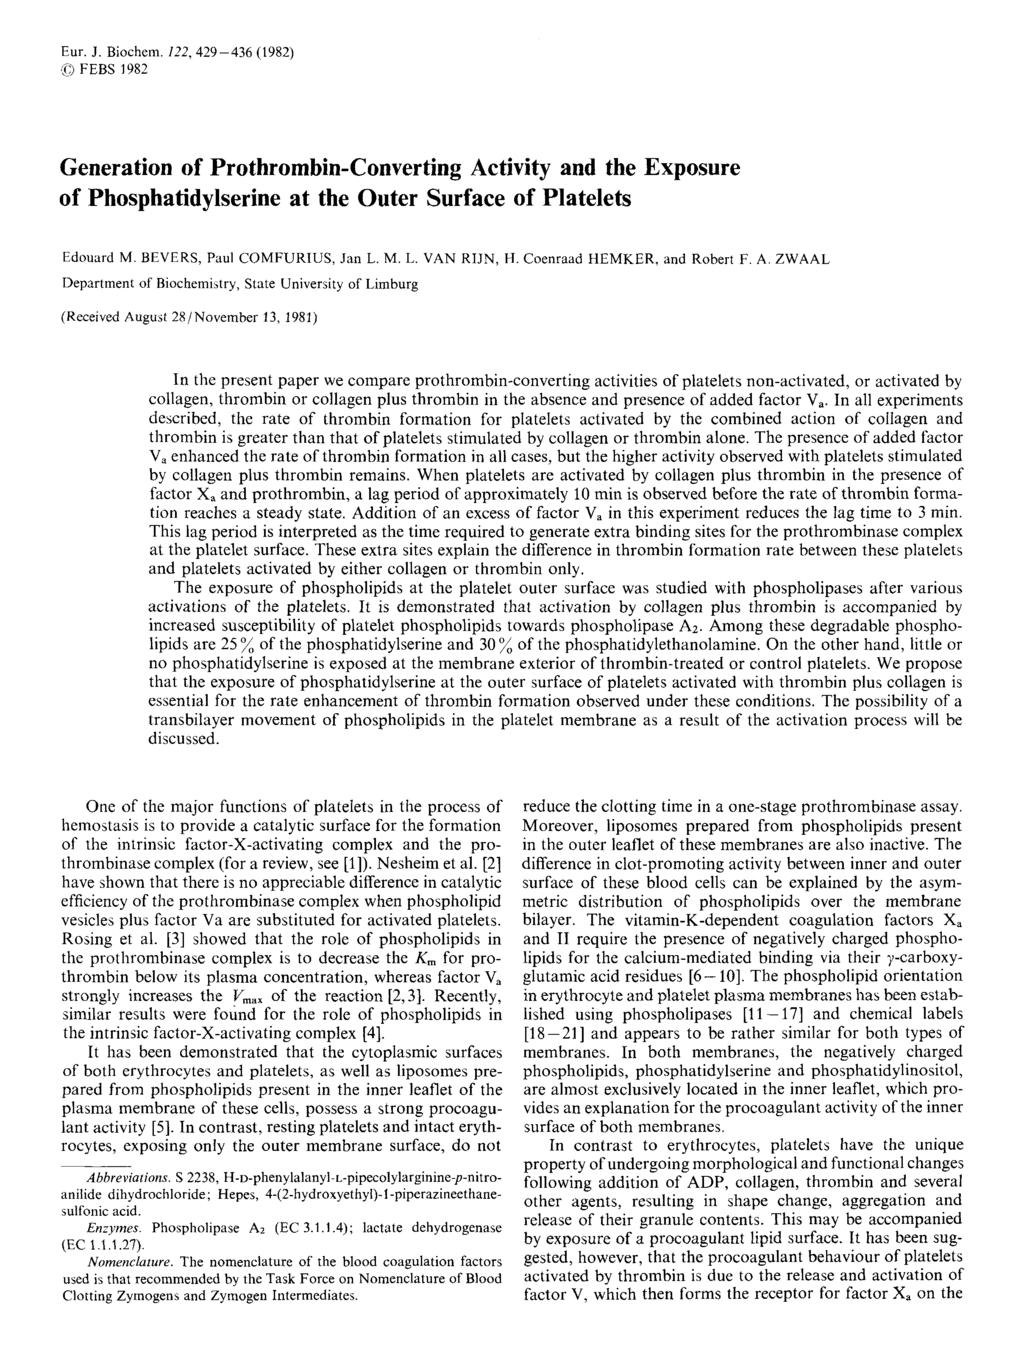 Eur. J. Biochem. 122,429-436 (2982) $) FEBS 1982 Generation of Prothrombin-Converting Activity and the Exposure of Phosphatidylserine at the Outer Surface of Platelets Edouard M.